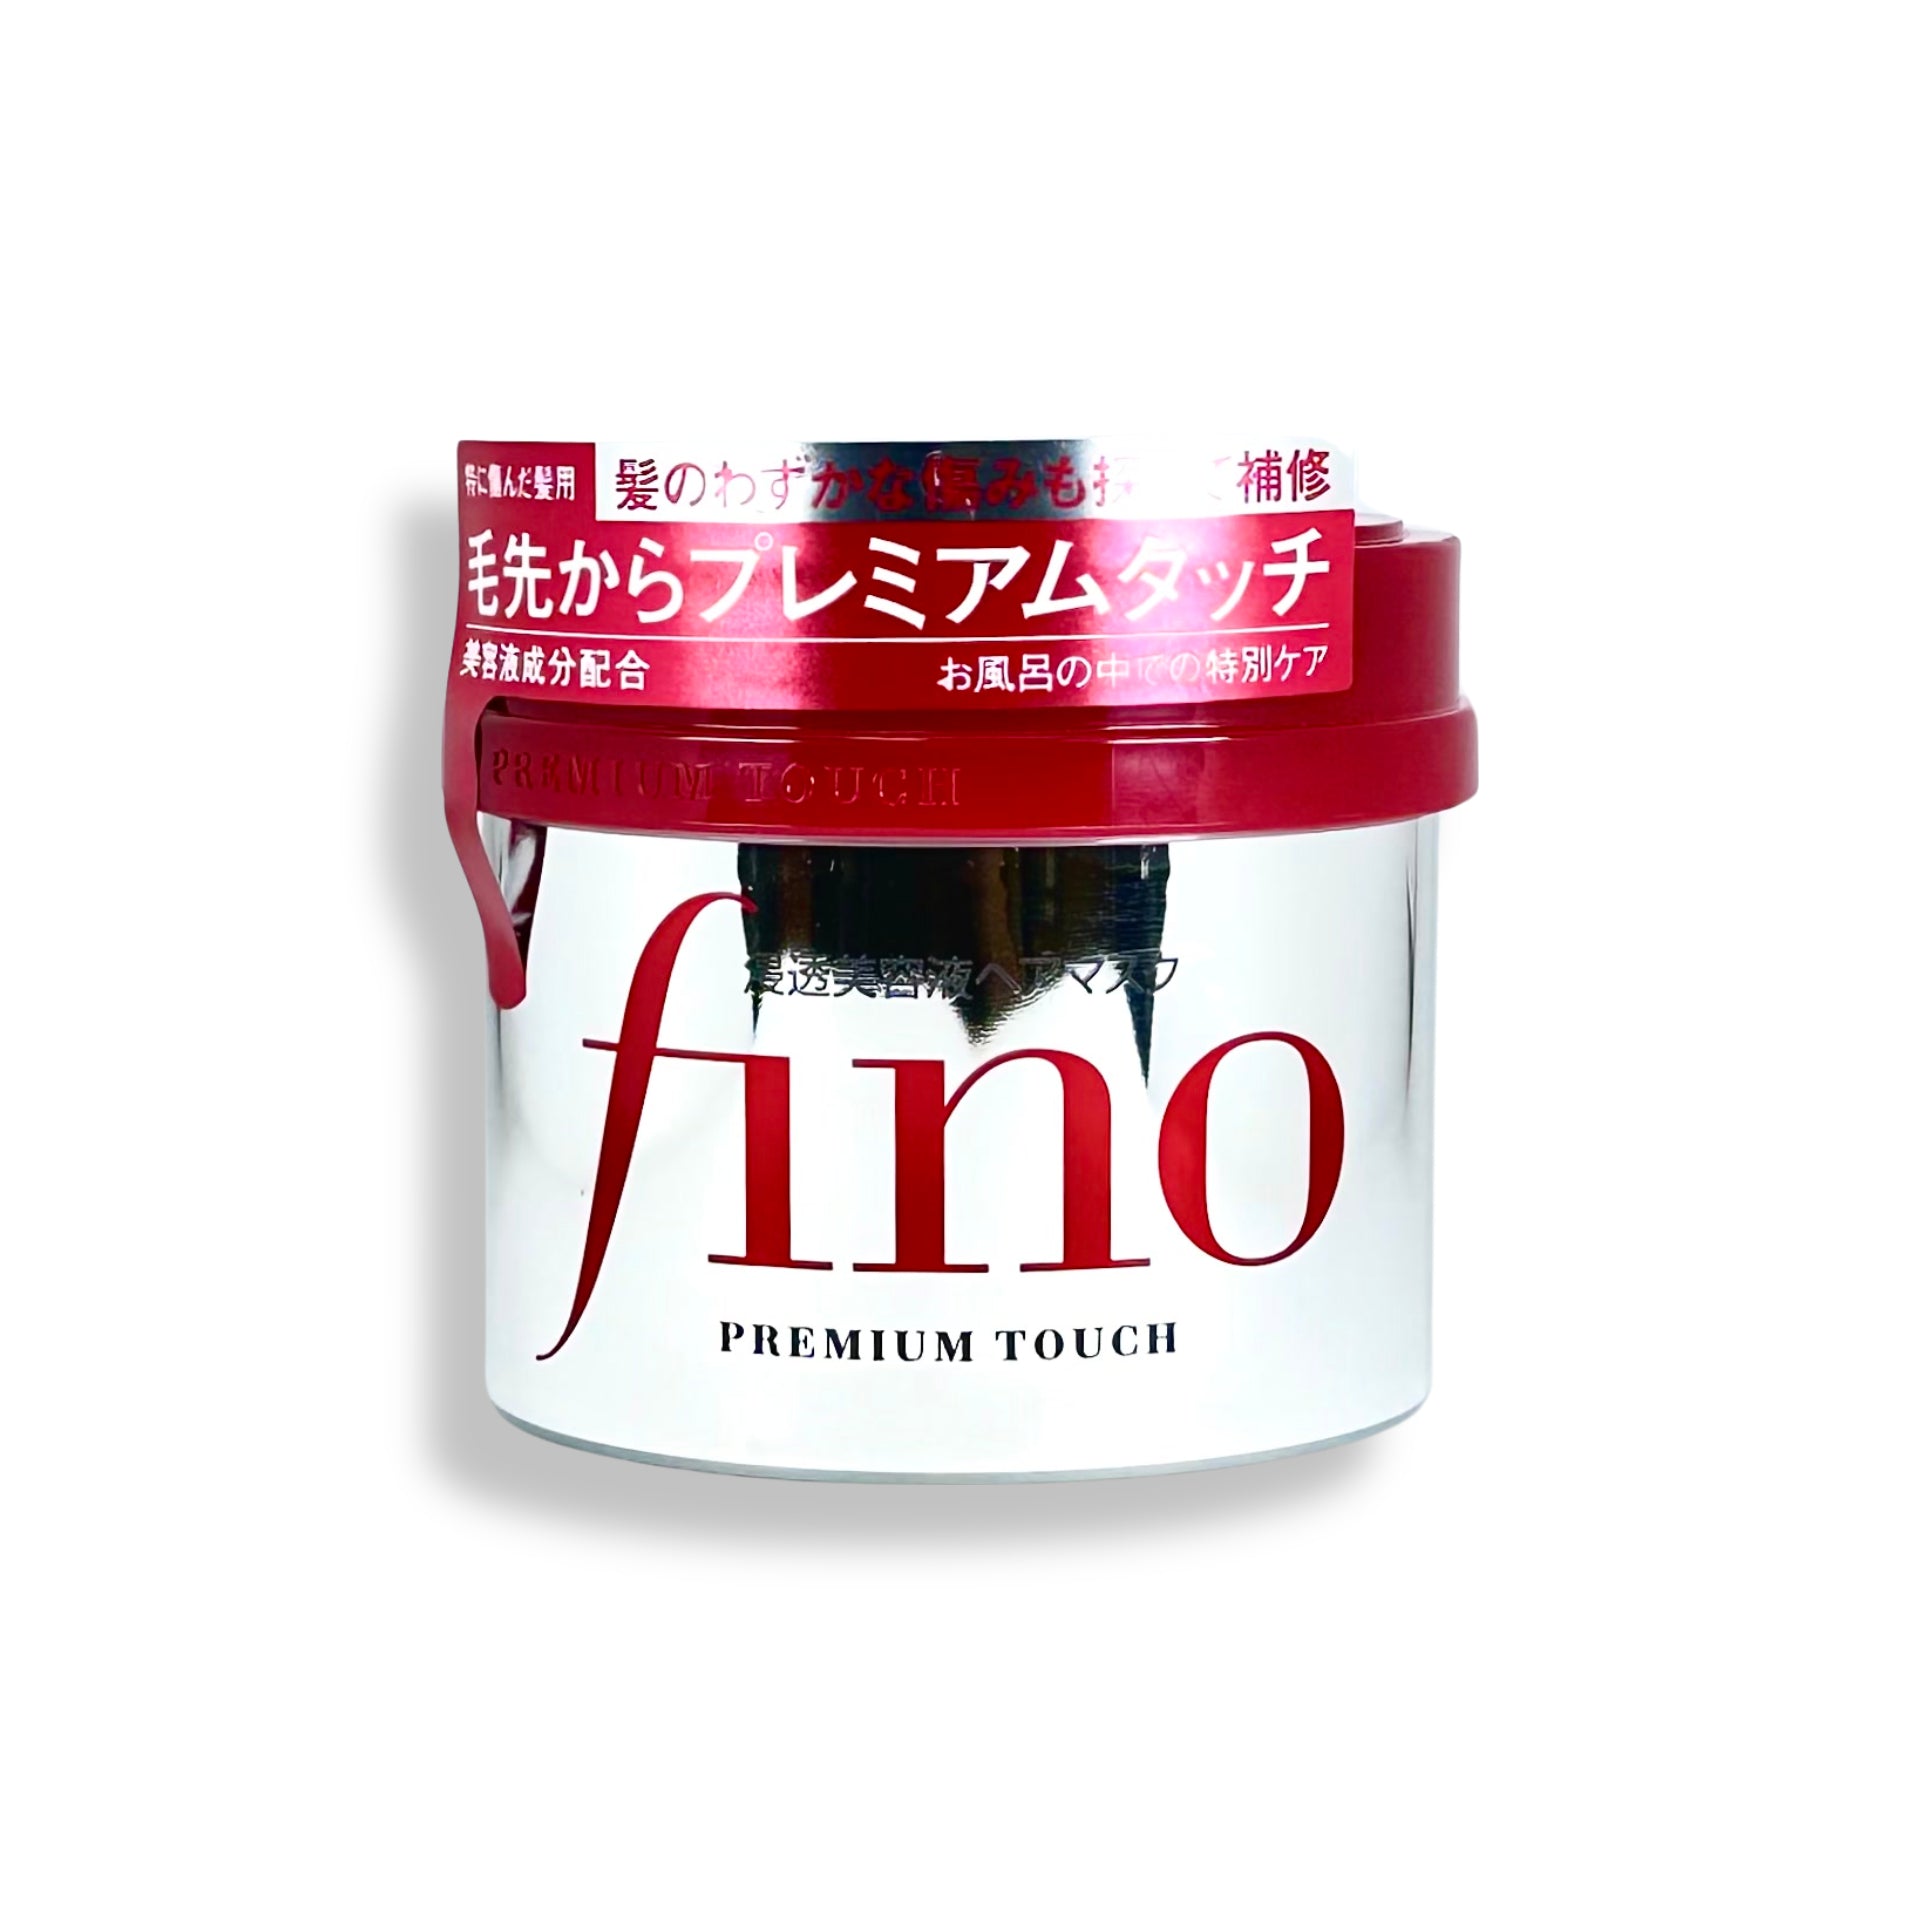 Buy SB9 Shiseido Fino Premium Touch Hair Mask Online at Best Prices in  India - JioMart.